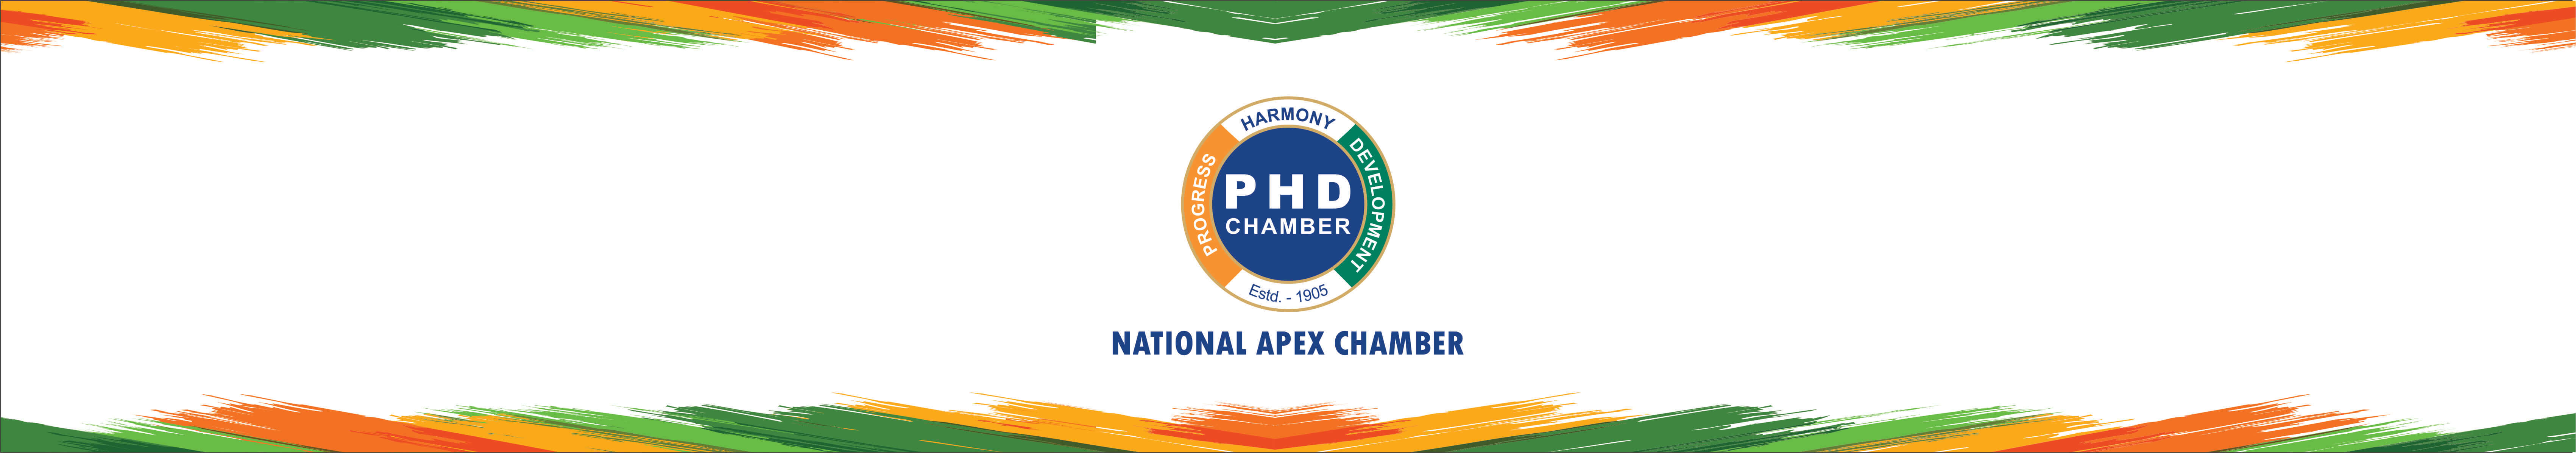 PHD Chamber Of Commerce and Industry